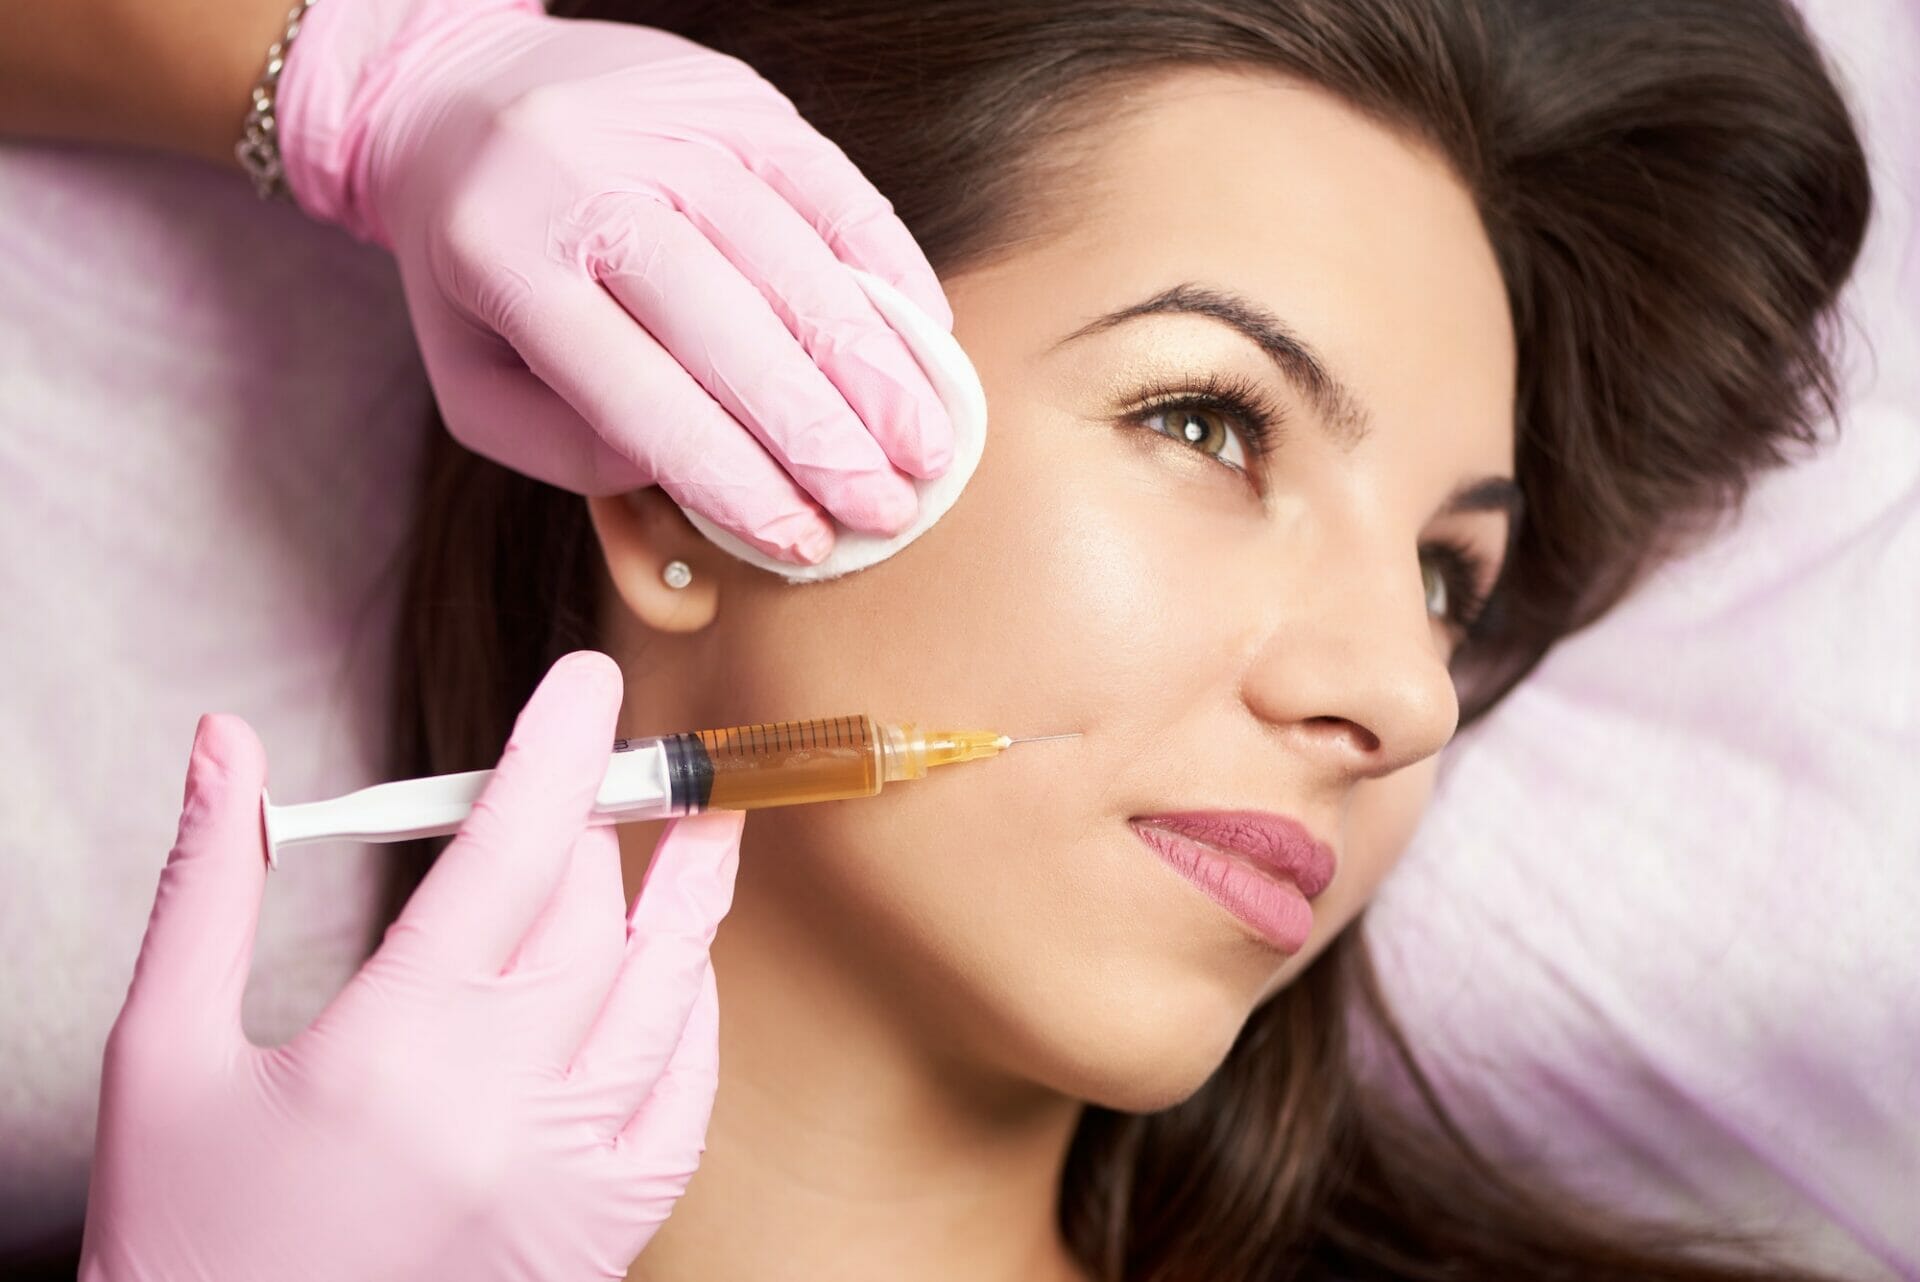 Close-up of beautiful woman getting injection in the cosmetology salon.